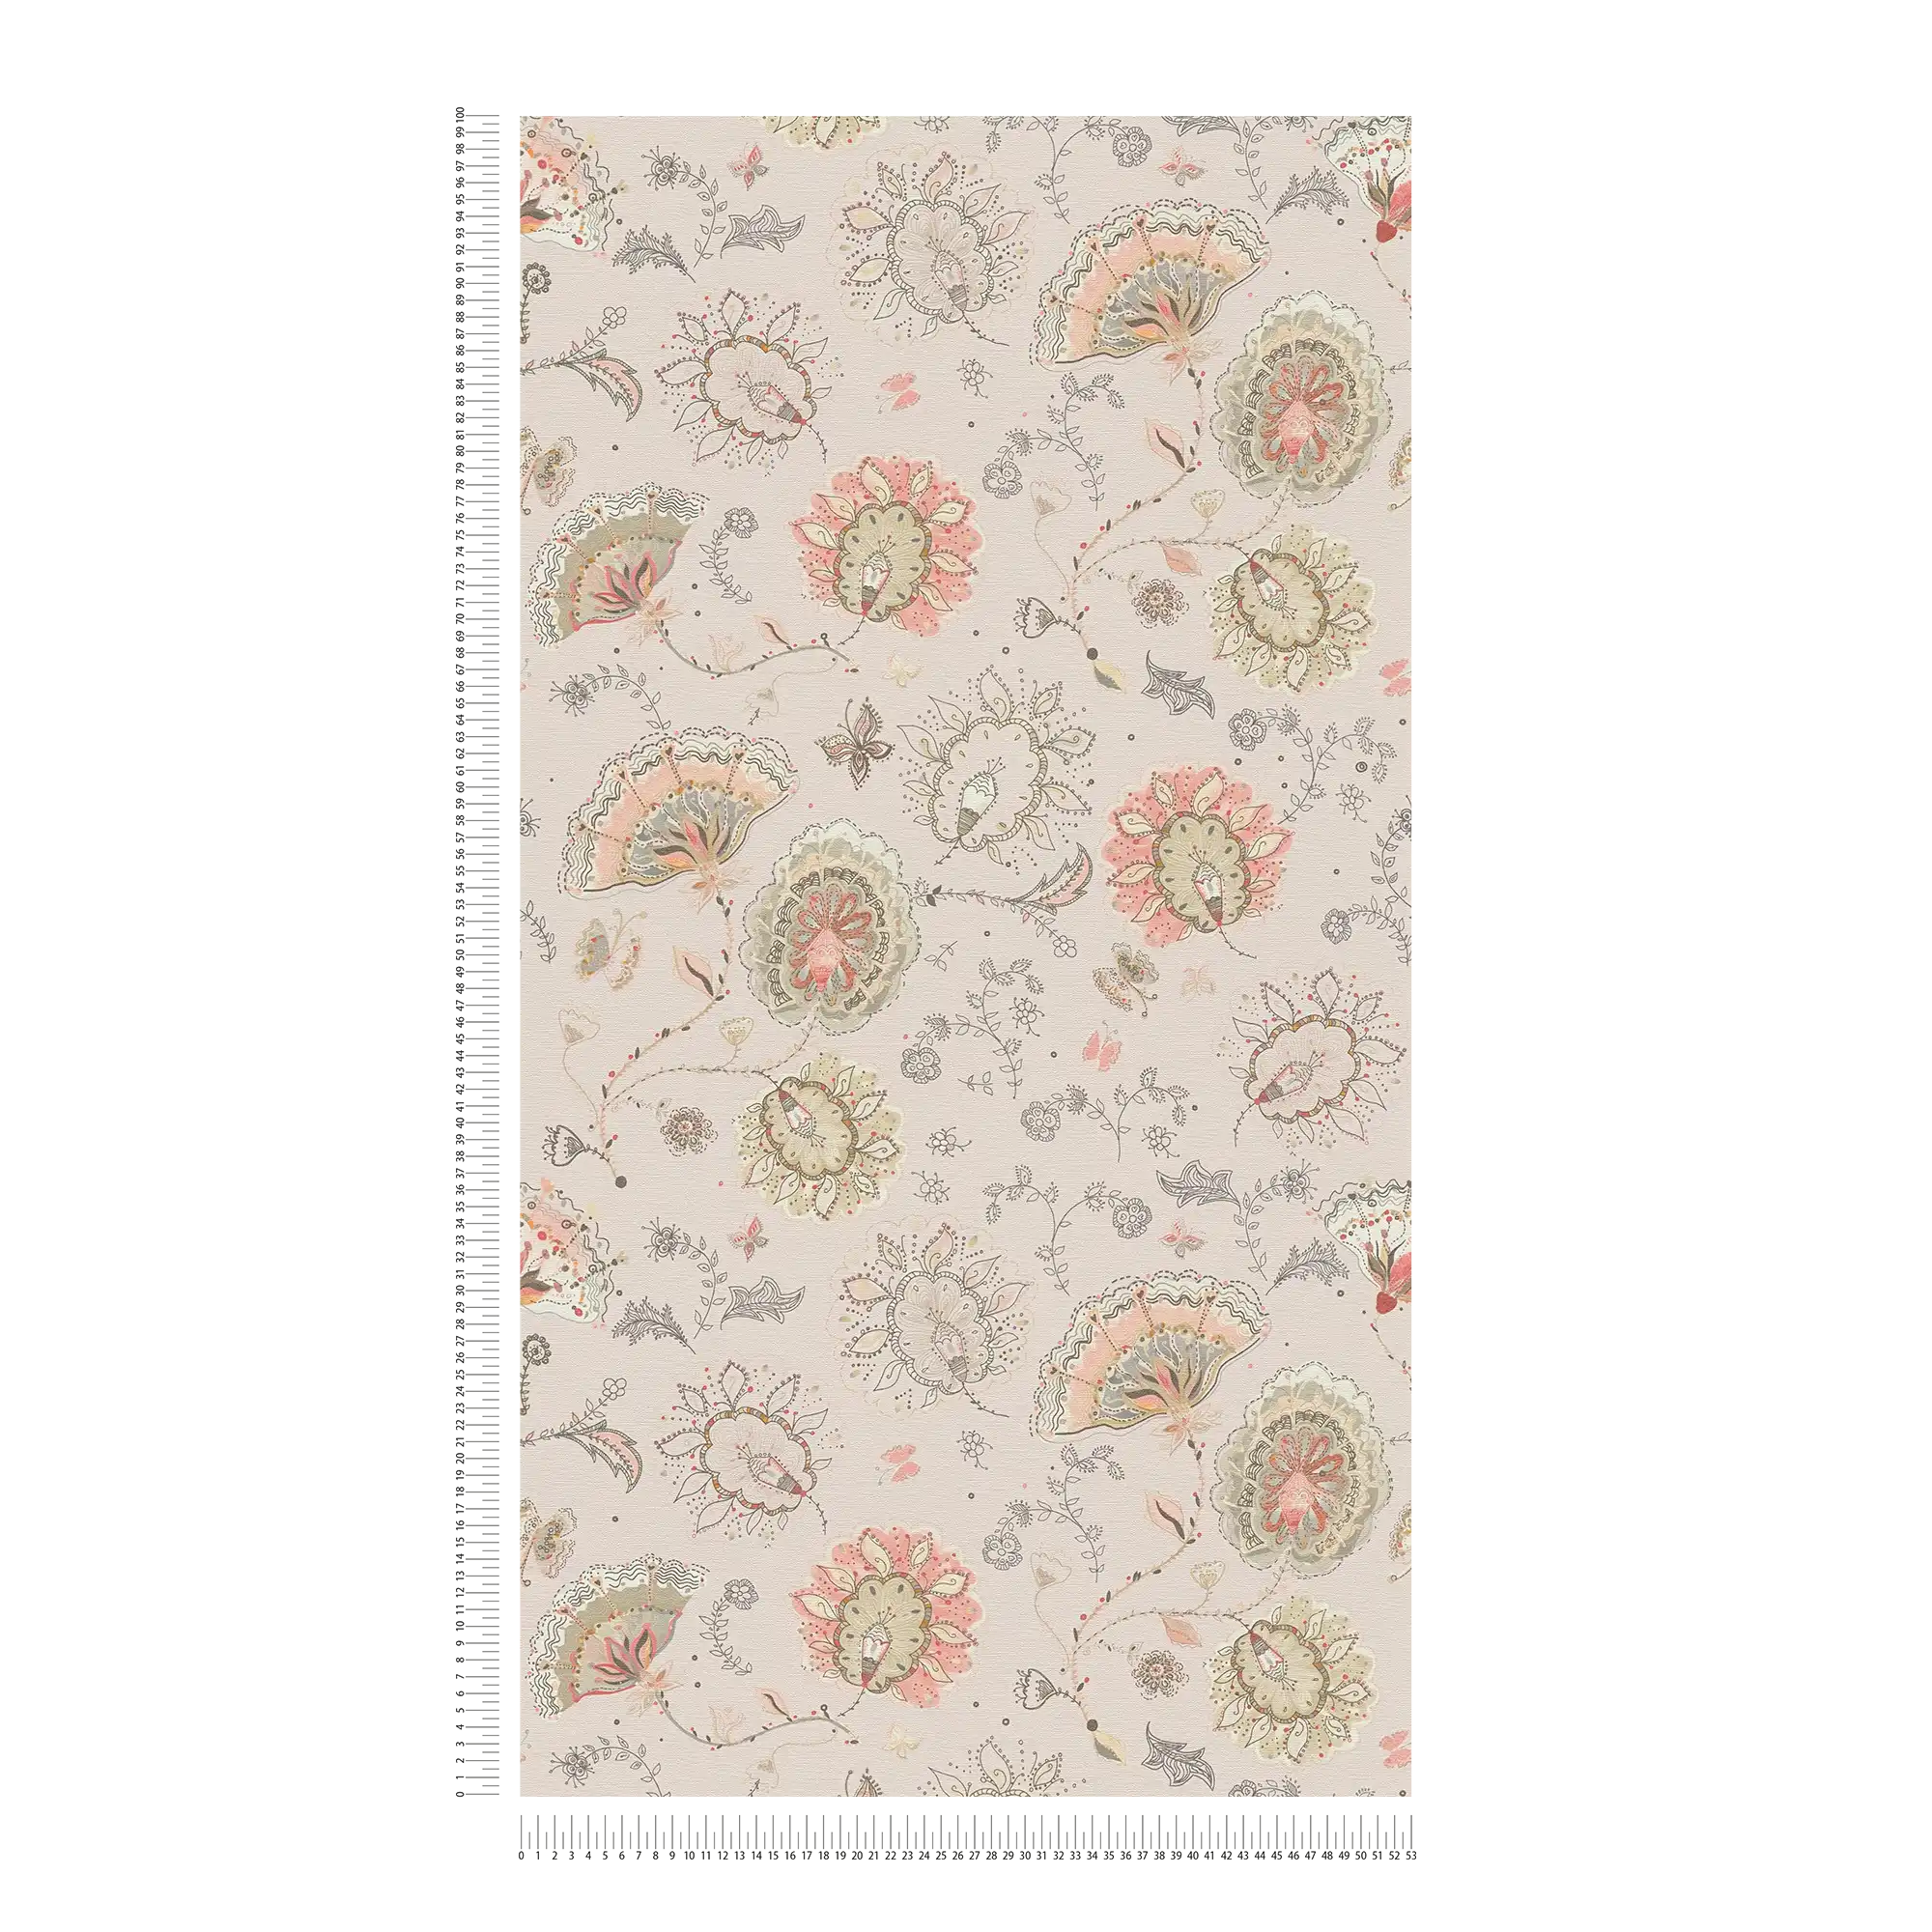             Floral wallpaper with abstract floral pattern & fine structure - grey, beige, red
        